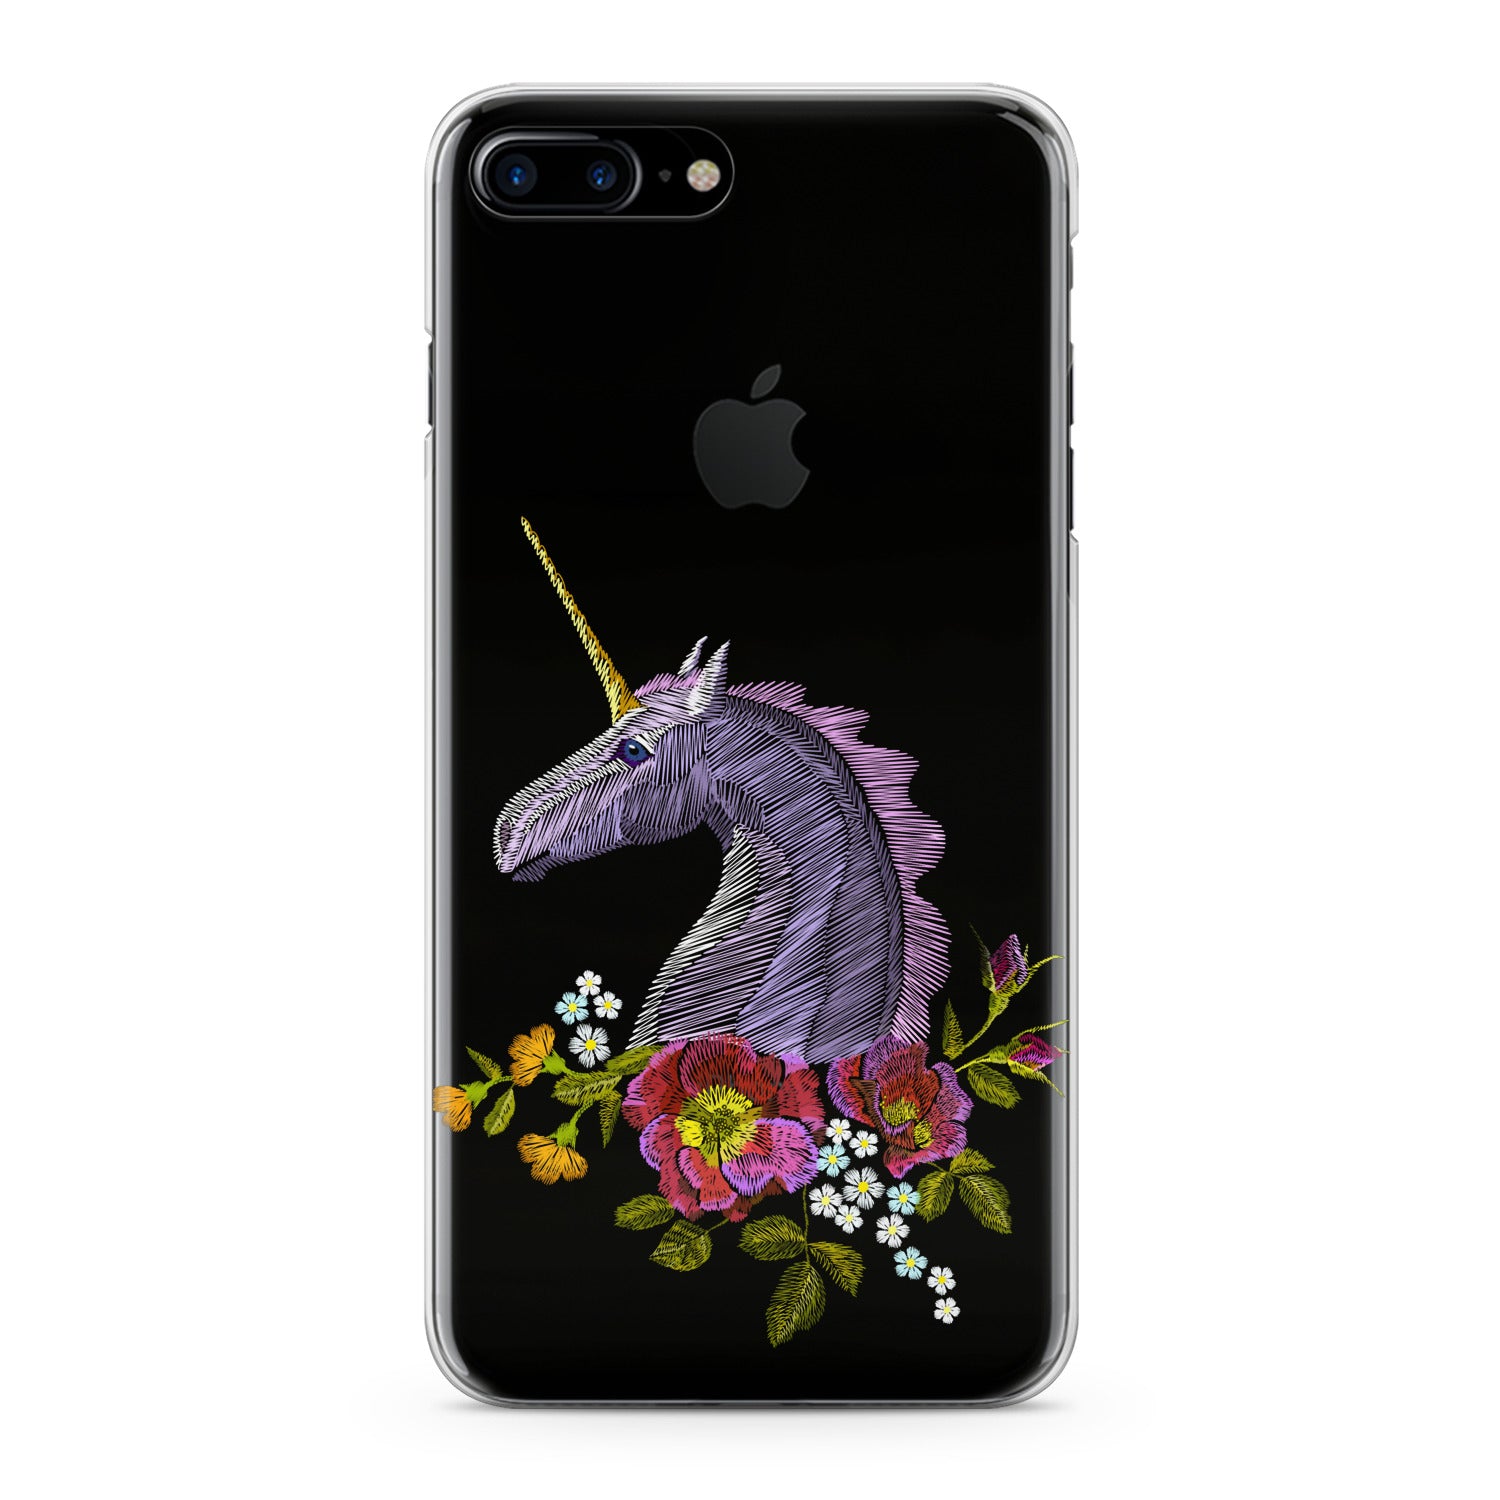 Lex Altern Purple Unicorn Phone Case for your iPhone & Android phone.